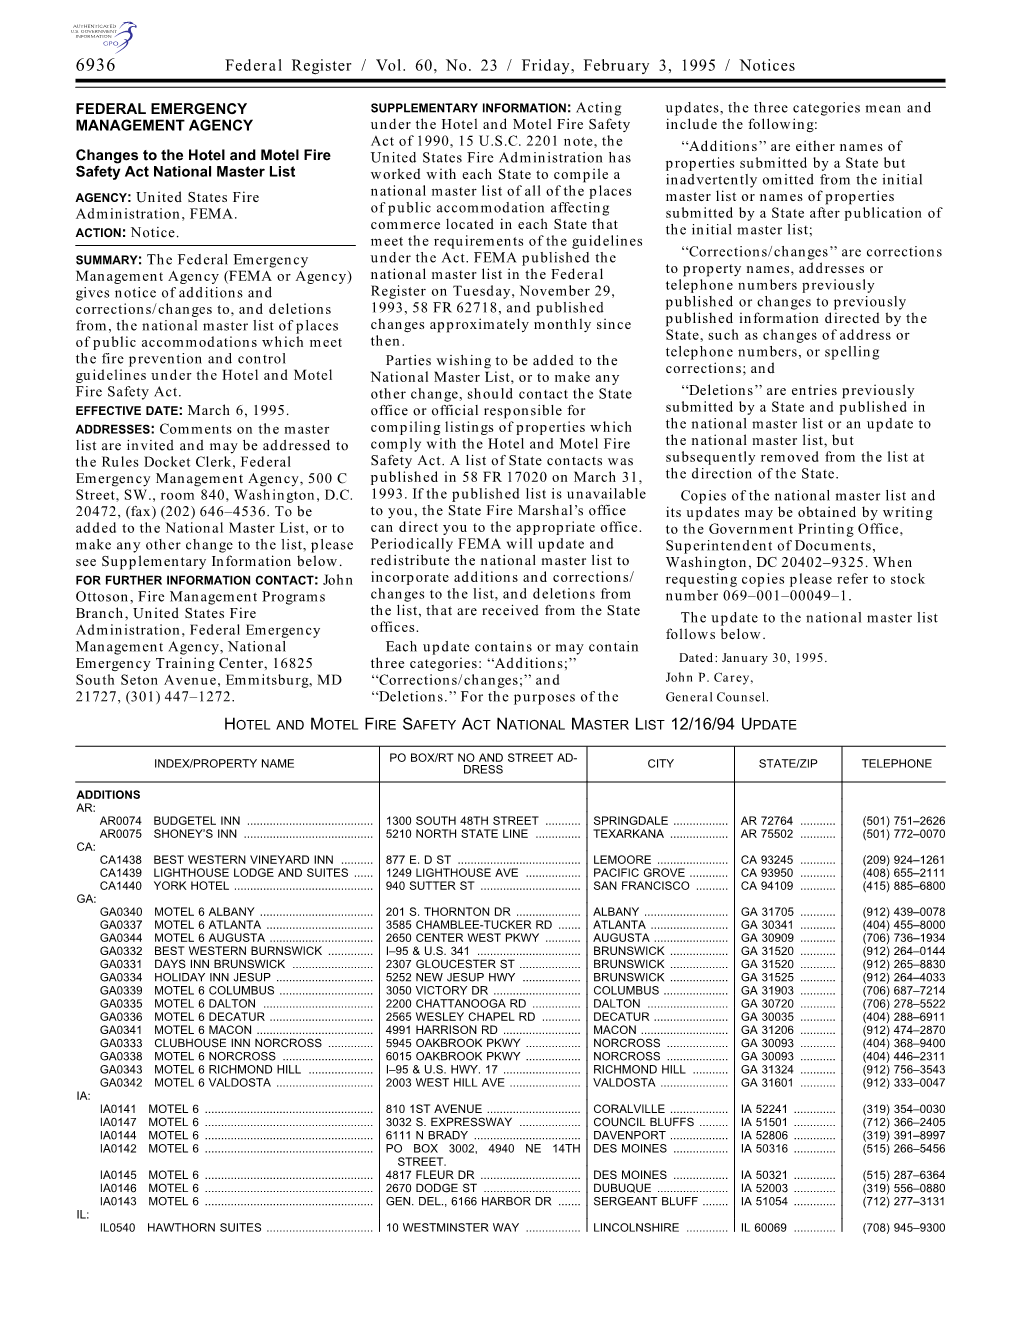 Federal Register / Vol. 60, No. 23 / Friday, February 3, 1995 / Notices